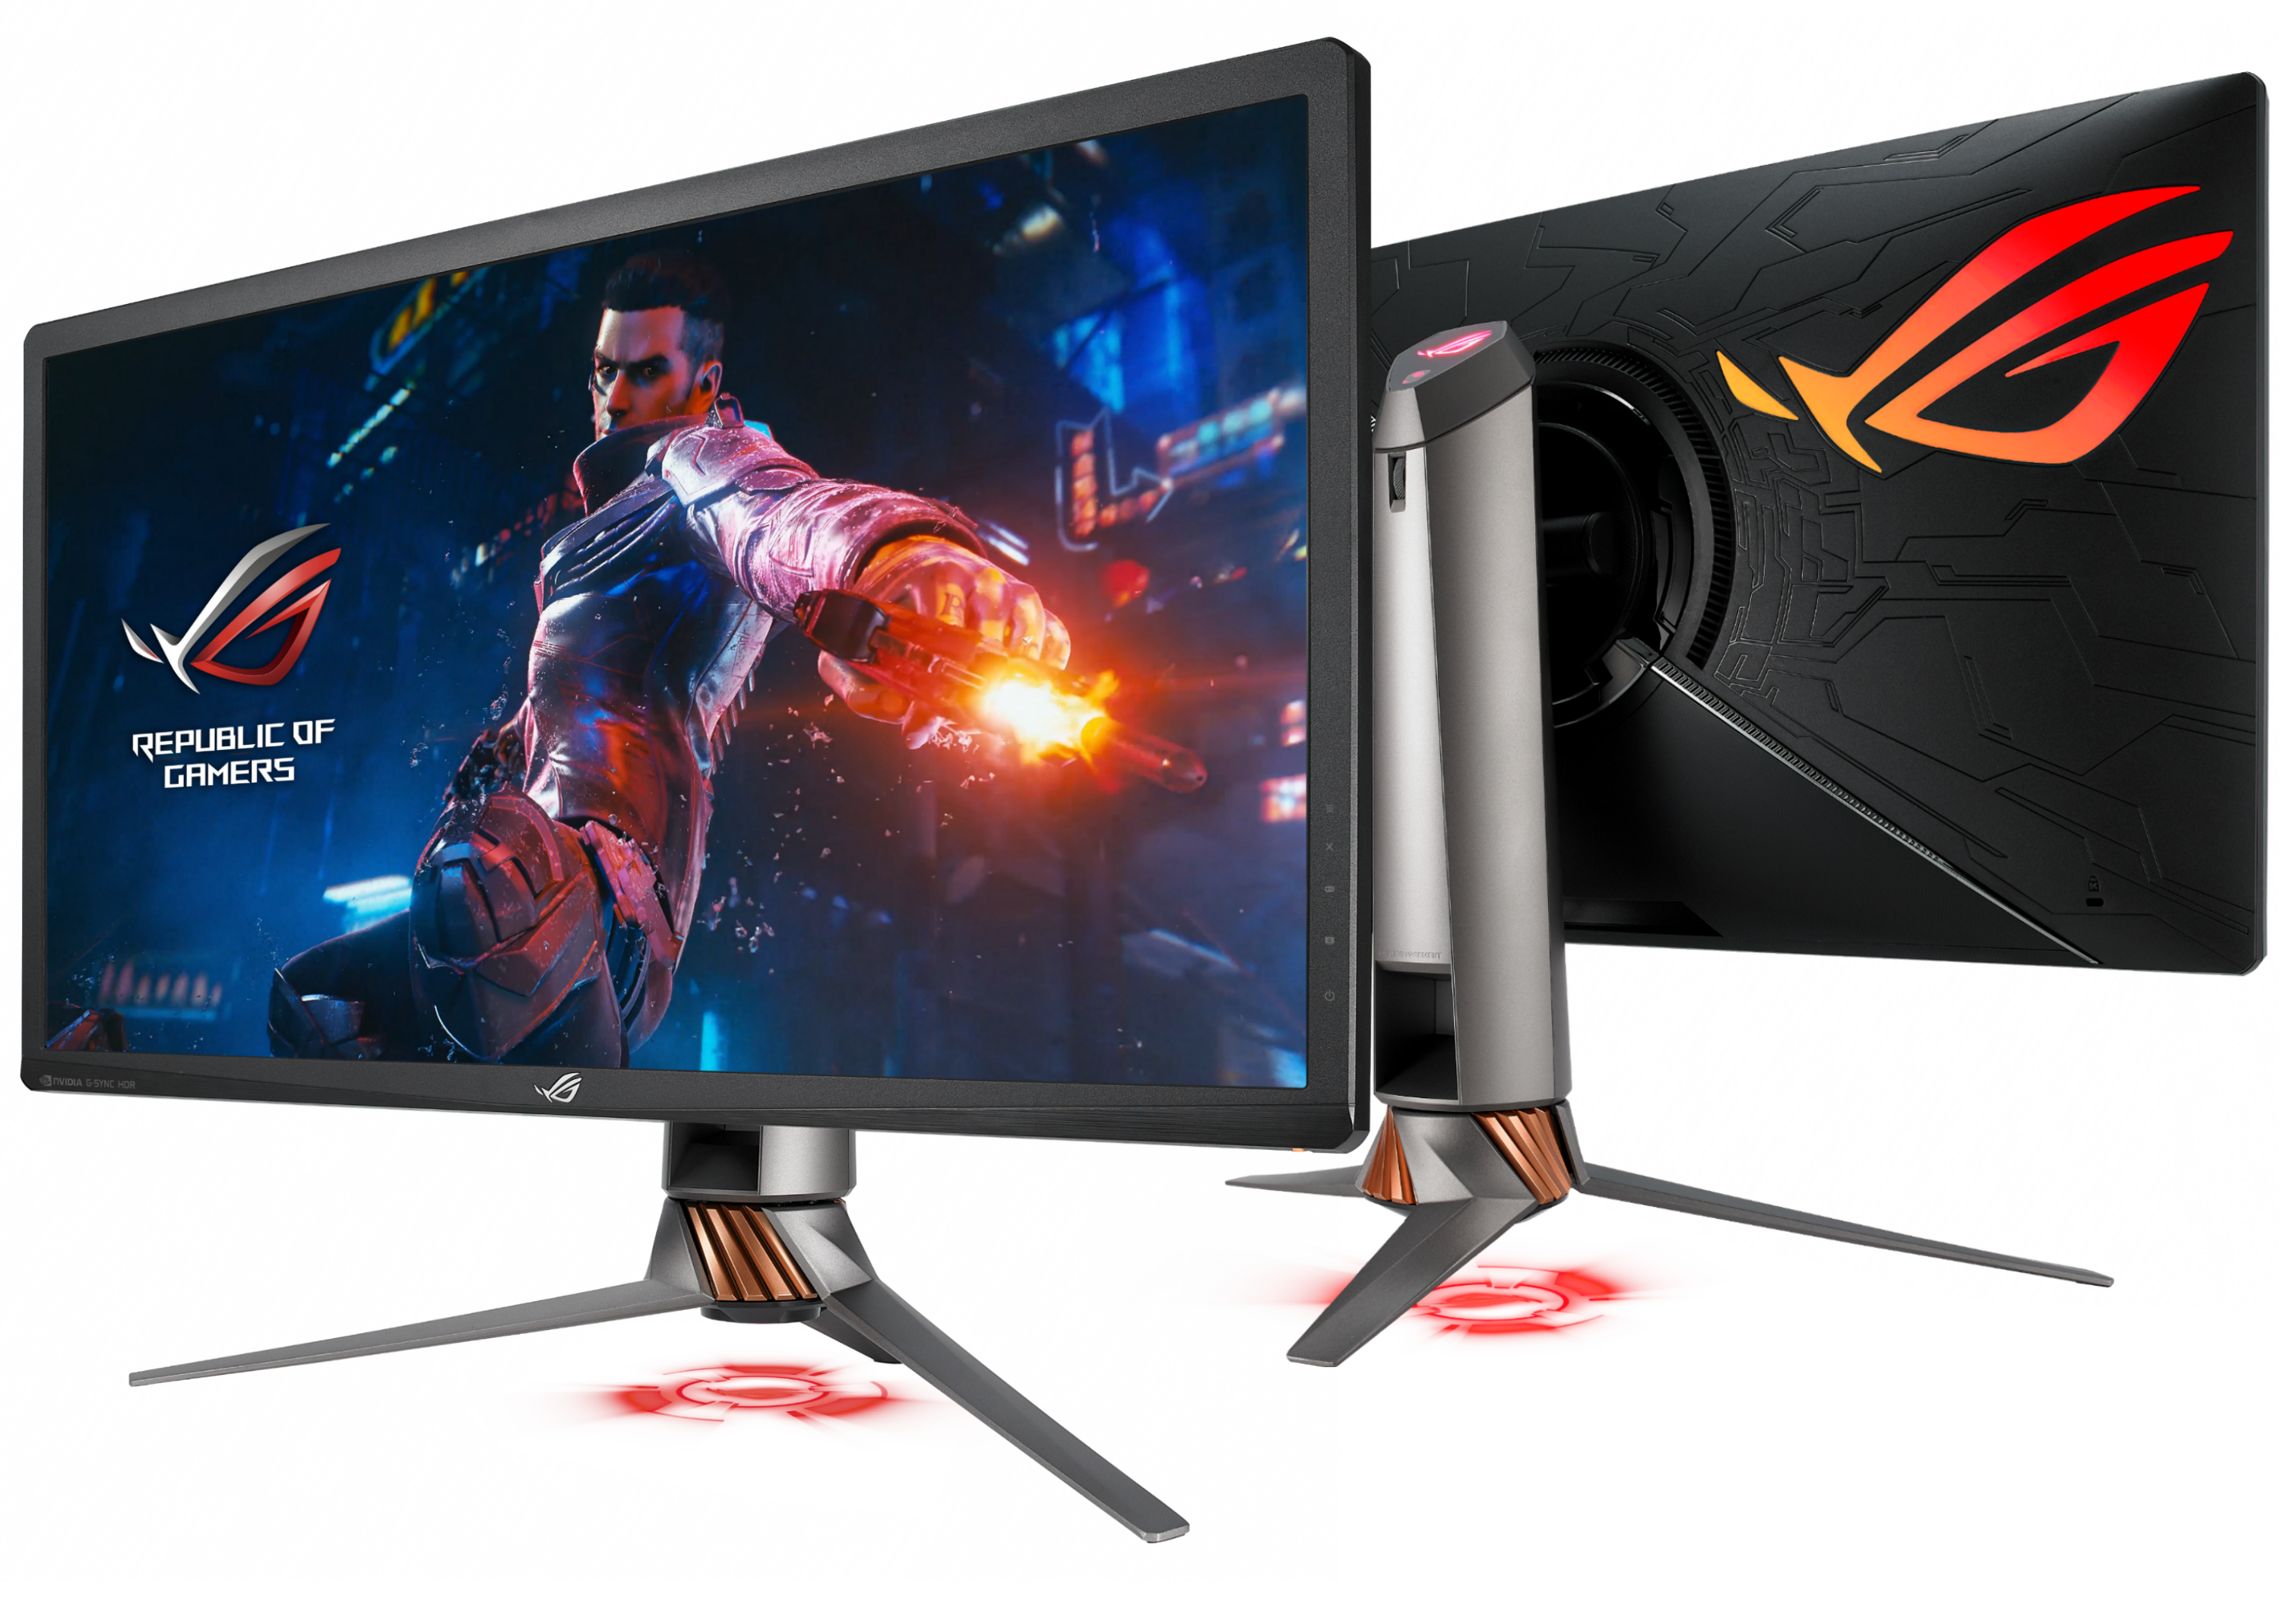 The ROG Swift PG27UQ is finally ready: 4K 144Hz with G-Sync HDR available  for pre-order